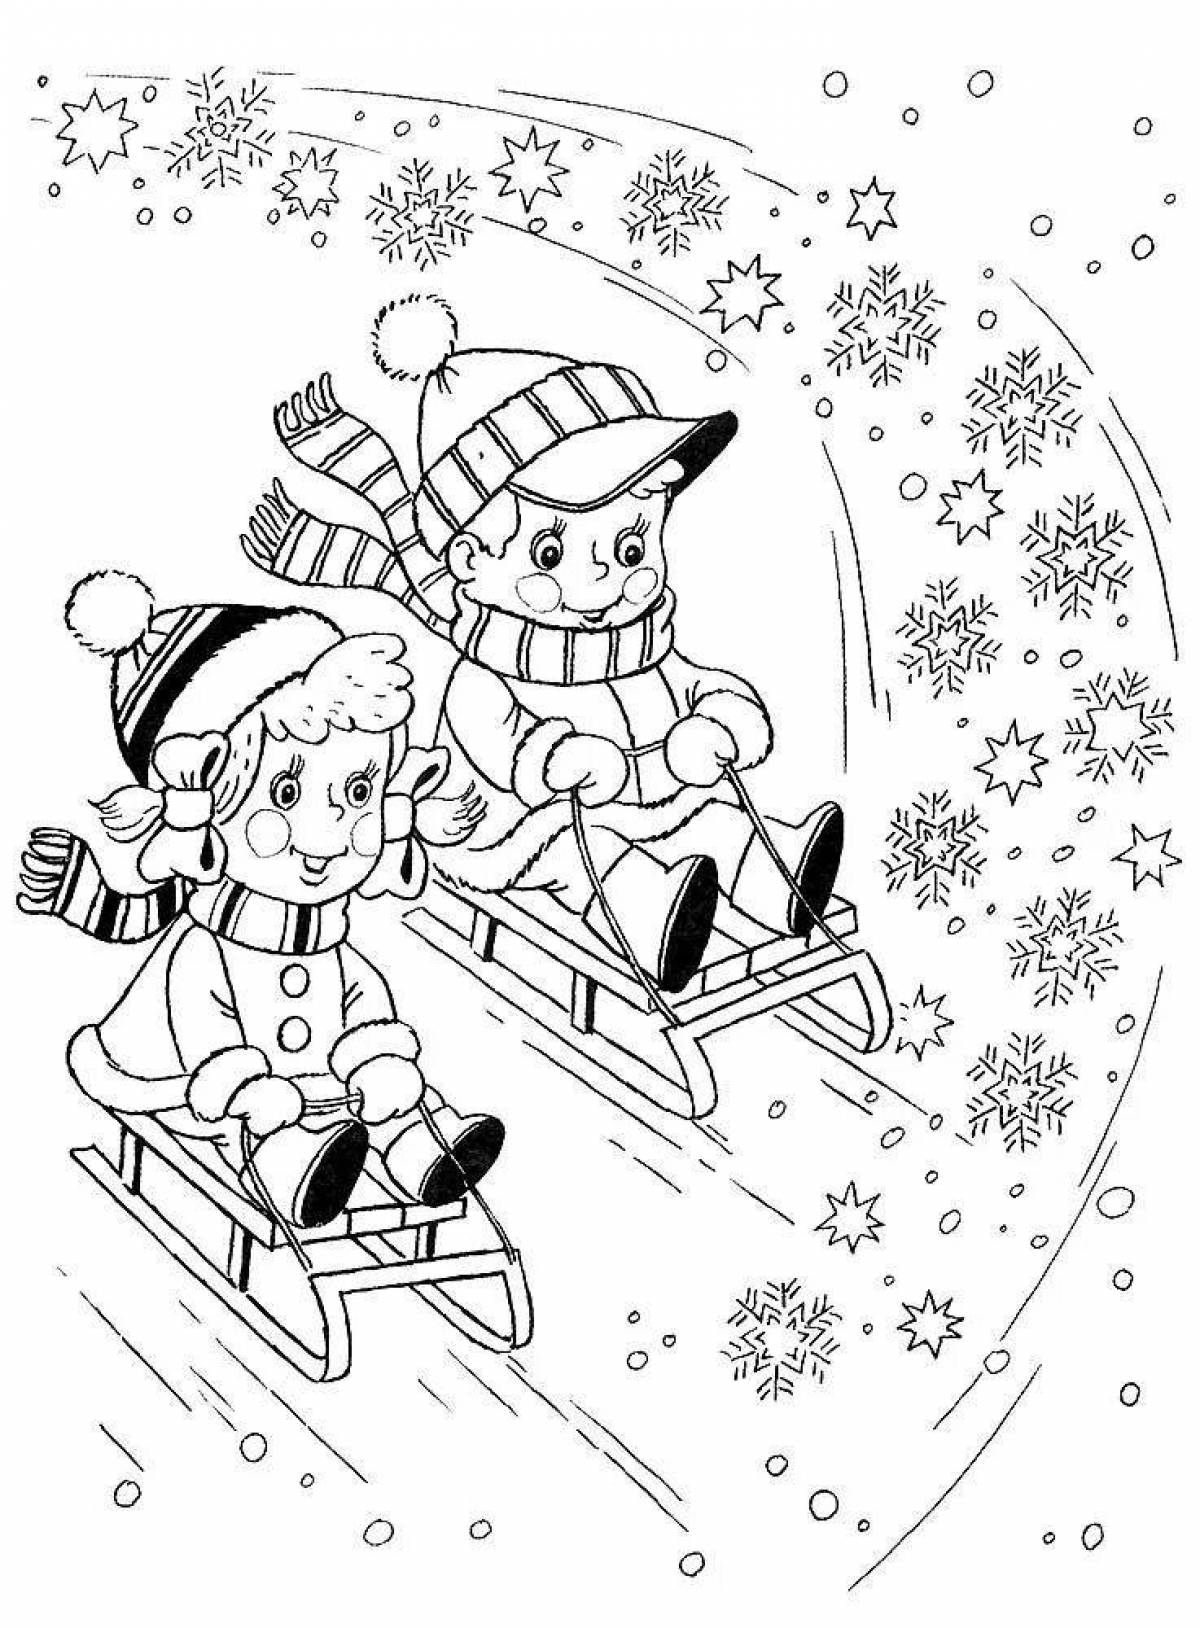 Glorious children's winter coloring